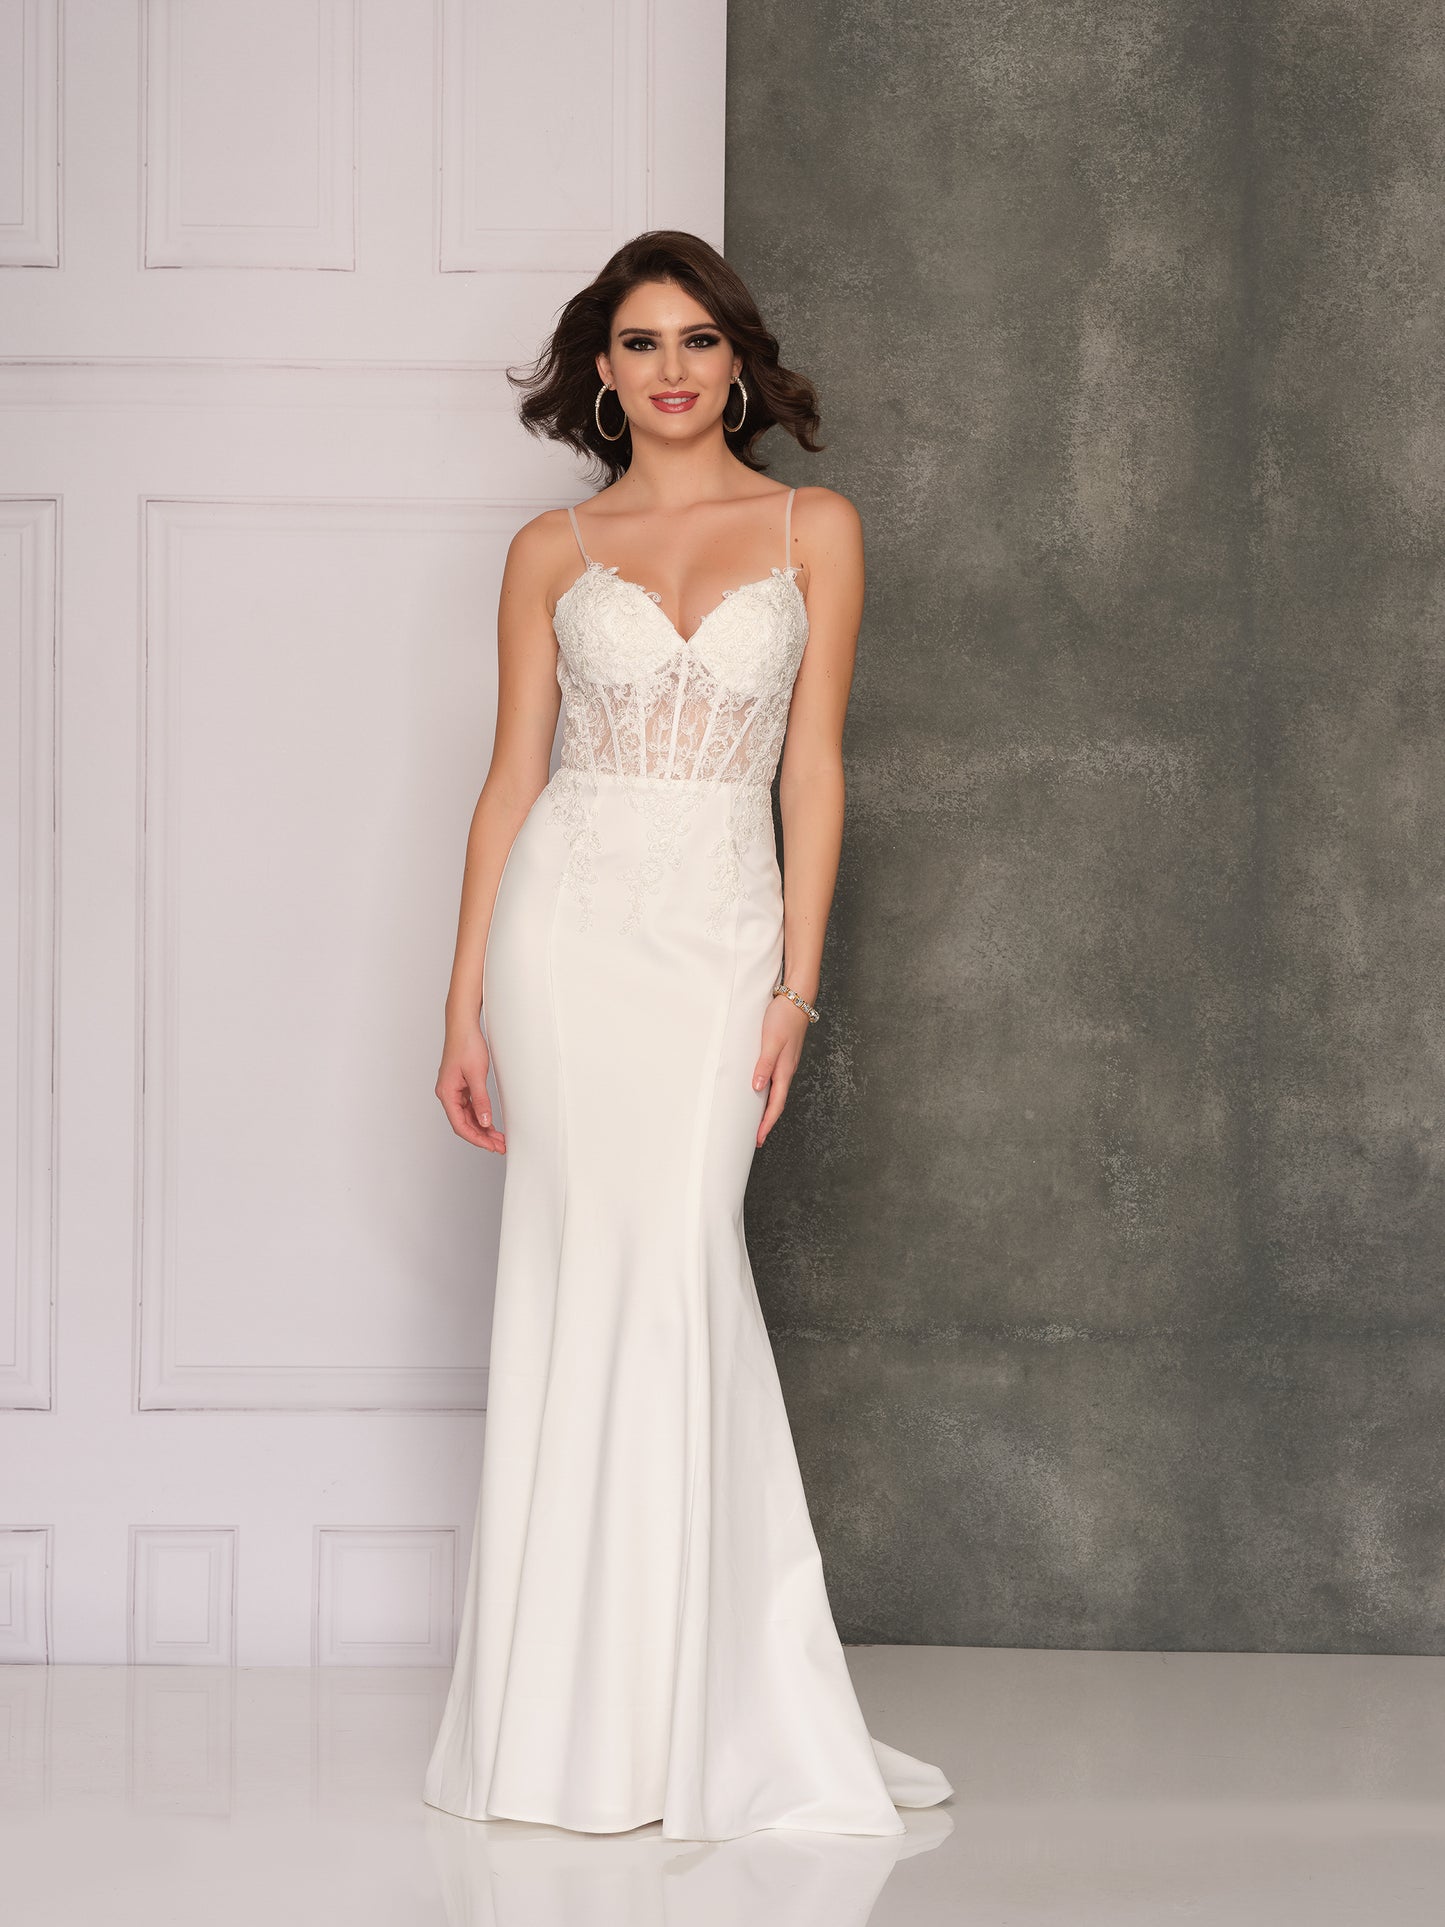 STRUCTURED LACE WEDDING GOWN